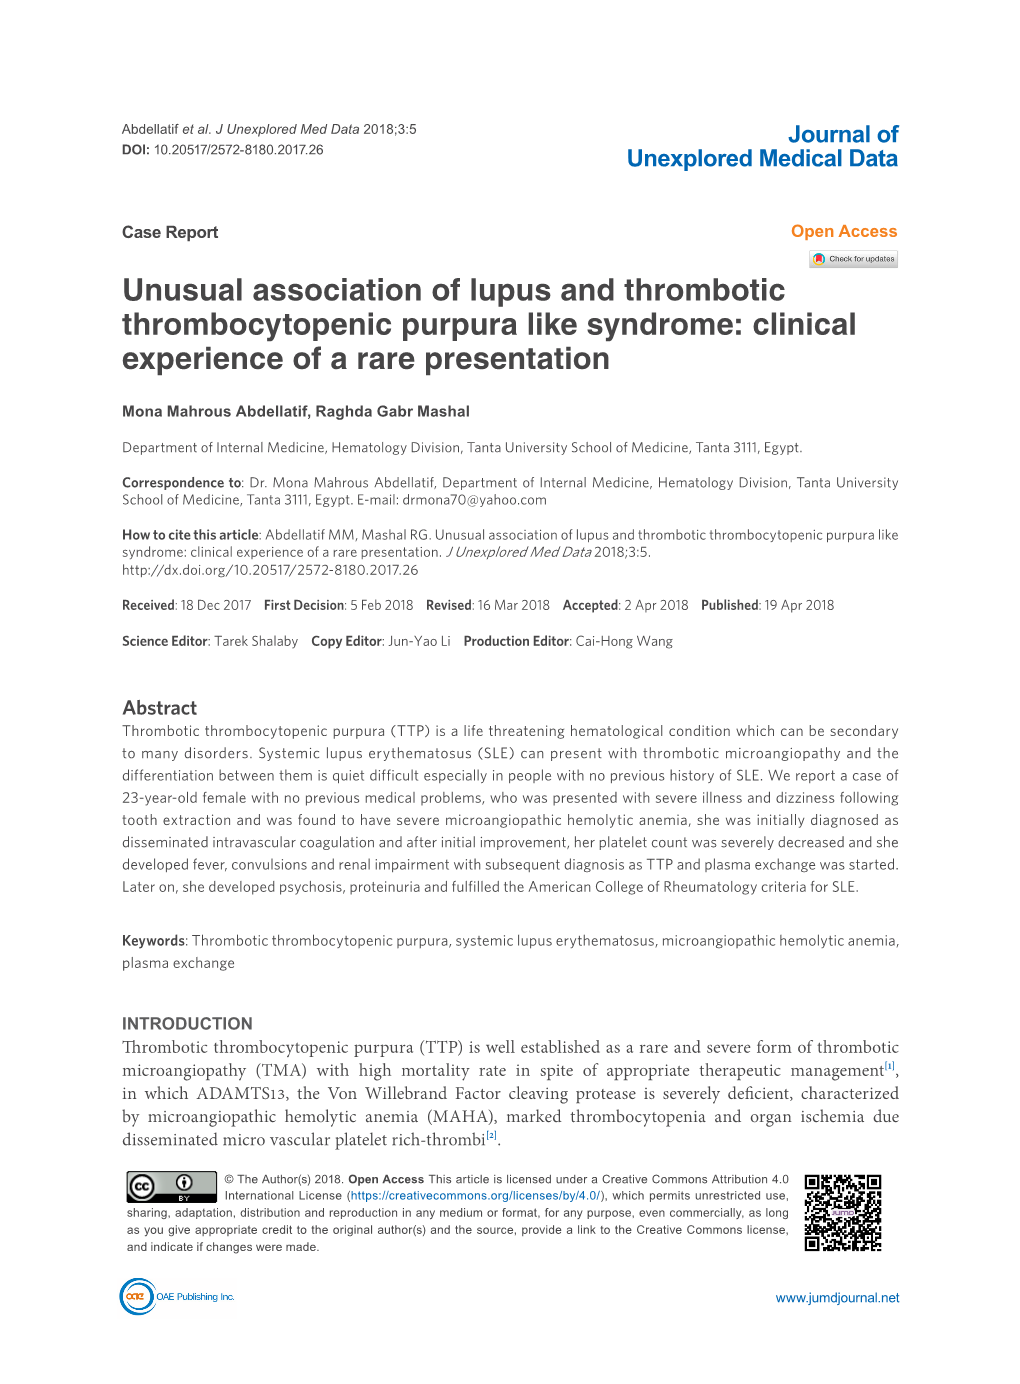 Unusual Association of Lupus and Thrombotic Thrombocytopenic Purpura Like Syndrome: Clinical Experience of a Rare Presentation